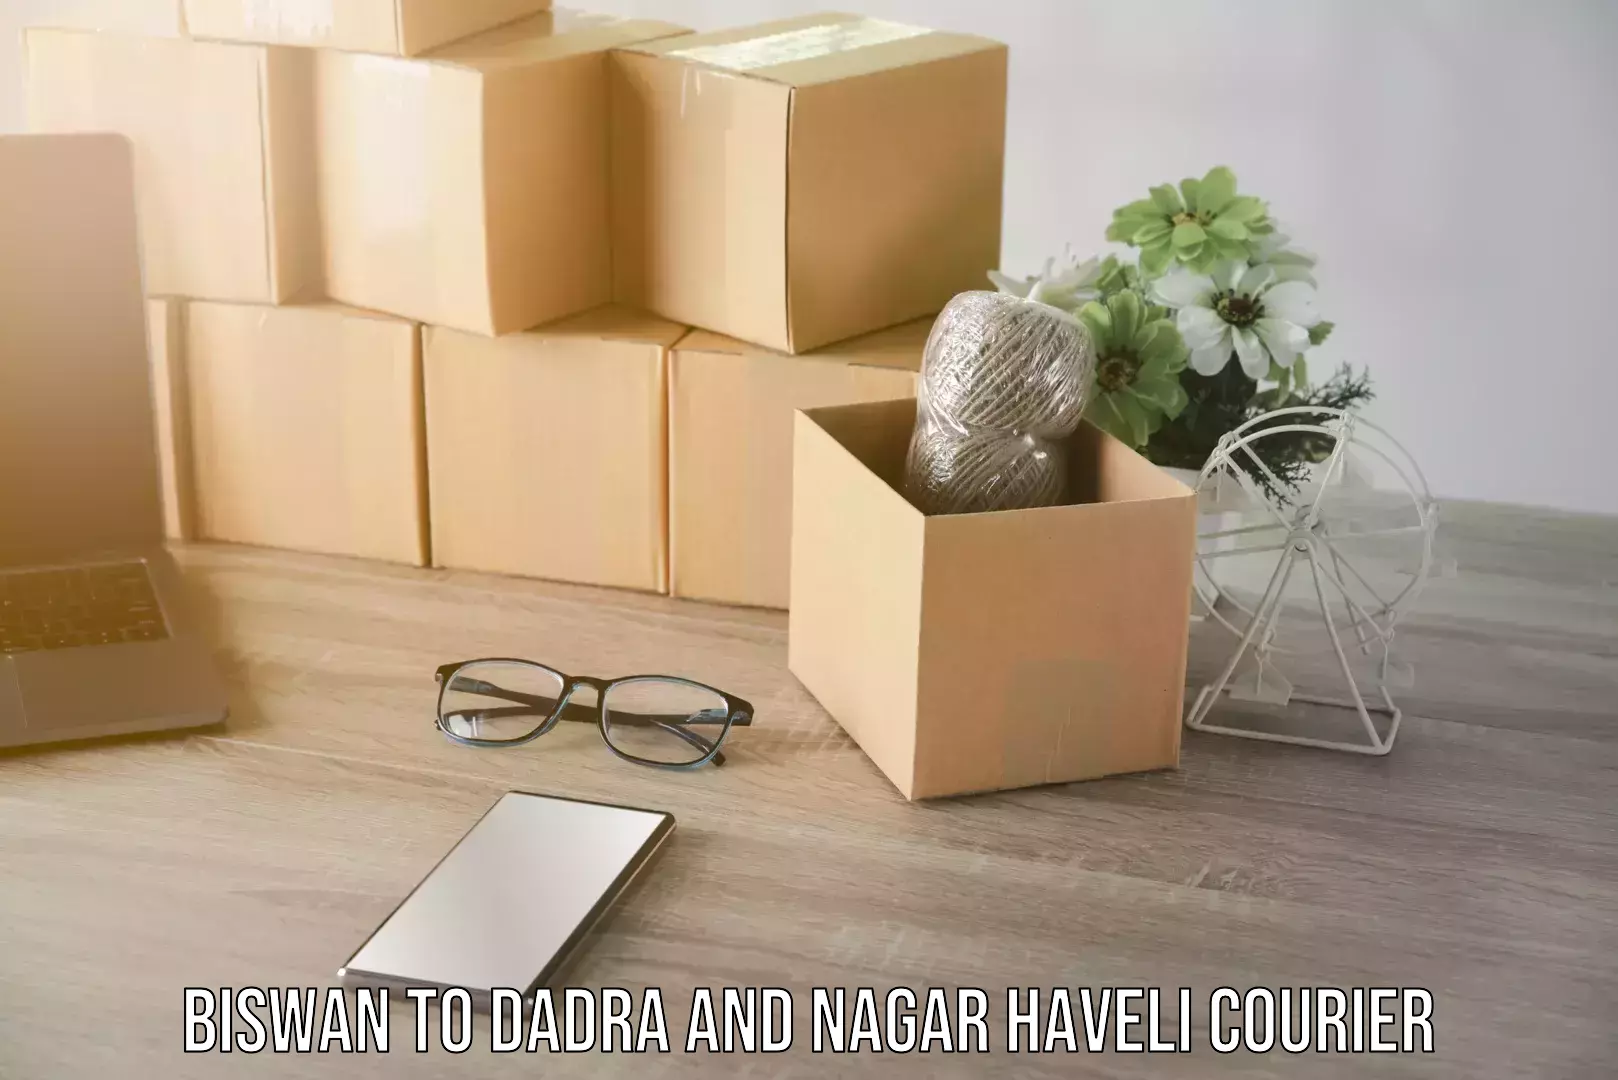 Global shipping solutions in Biswan to Dadra and Nagar Haveli